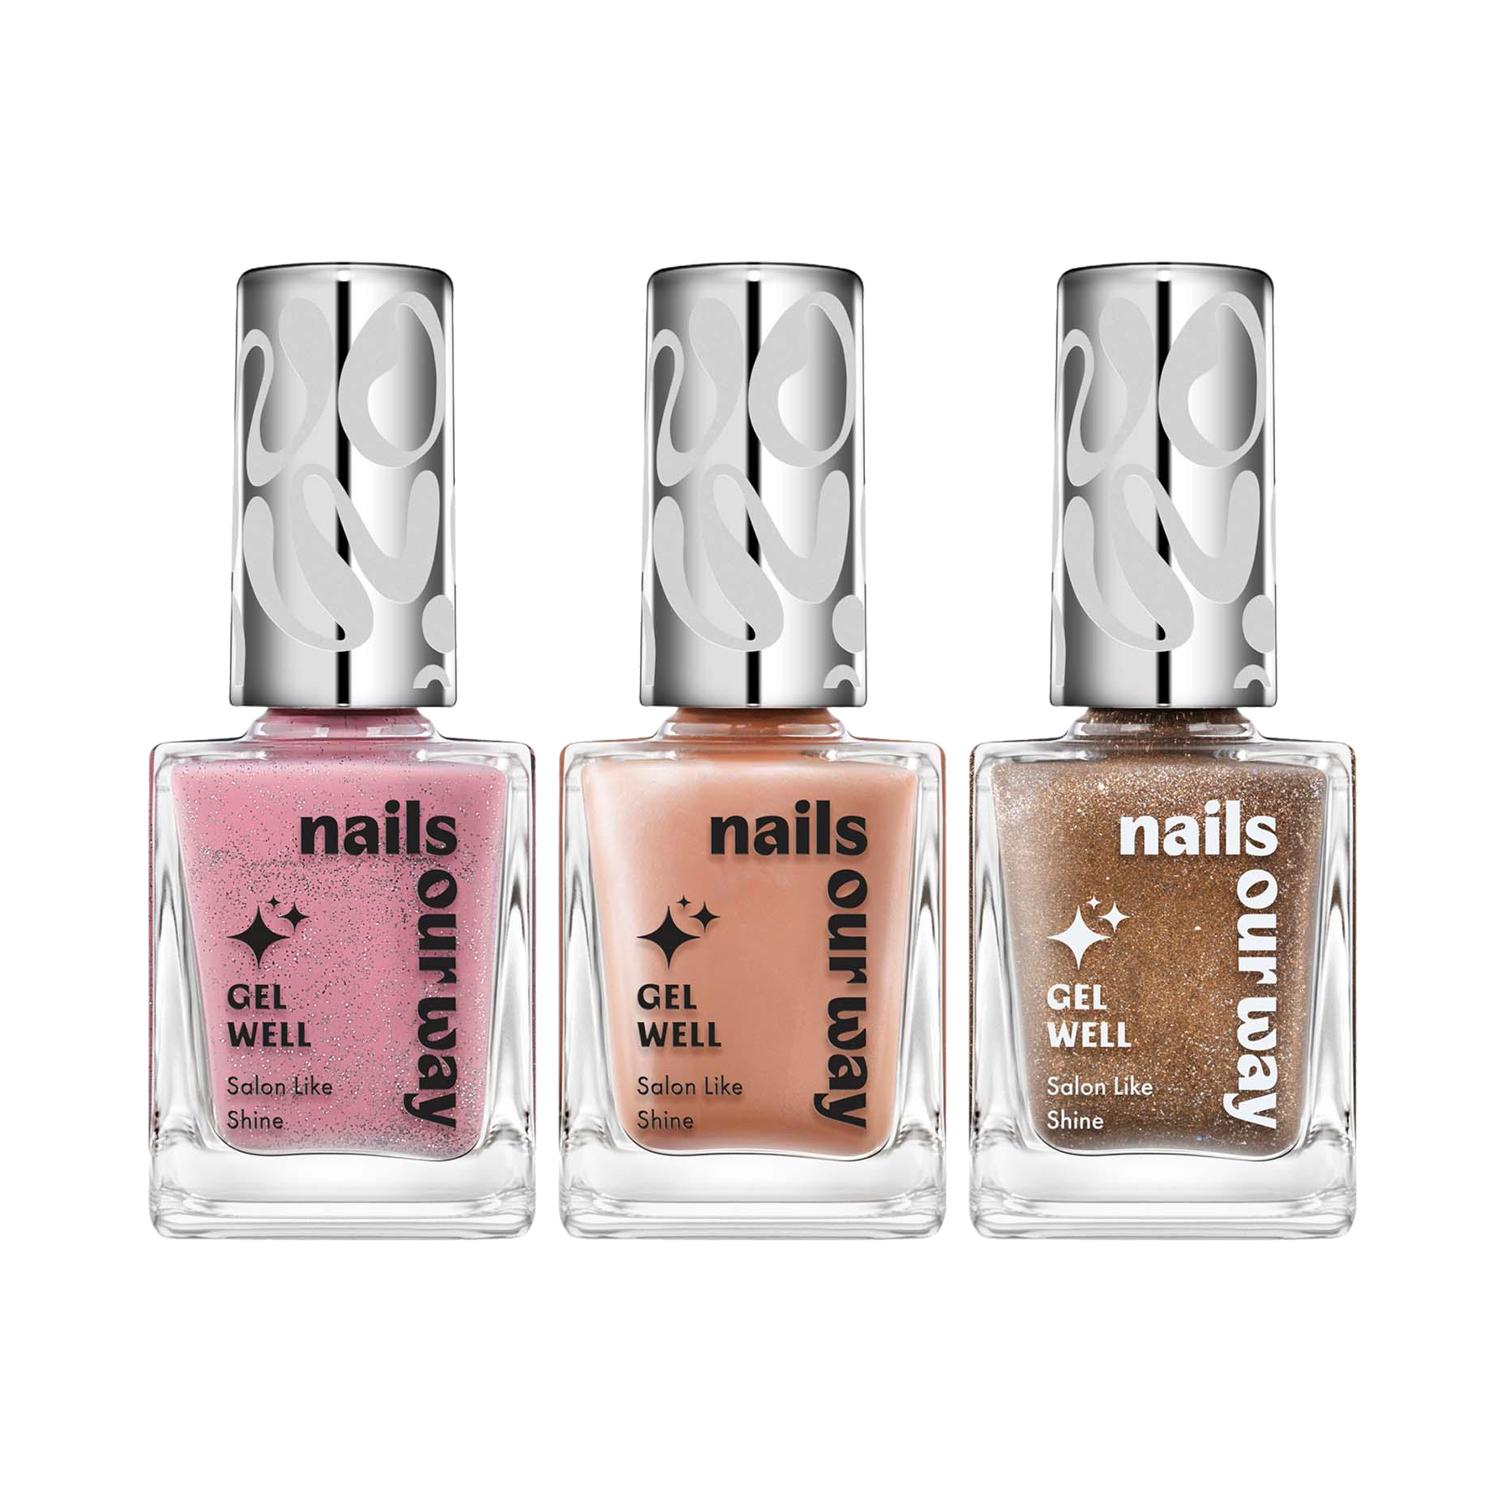 Nails Our Way | Nails Our Way Gel Well Nail Enamel Vintage Chic Combo - Pk3